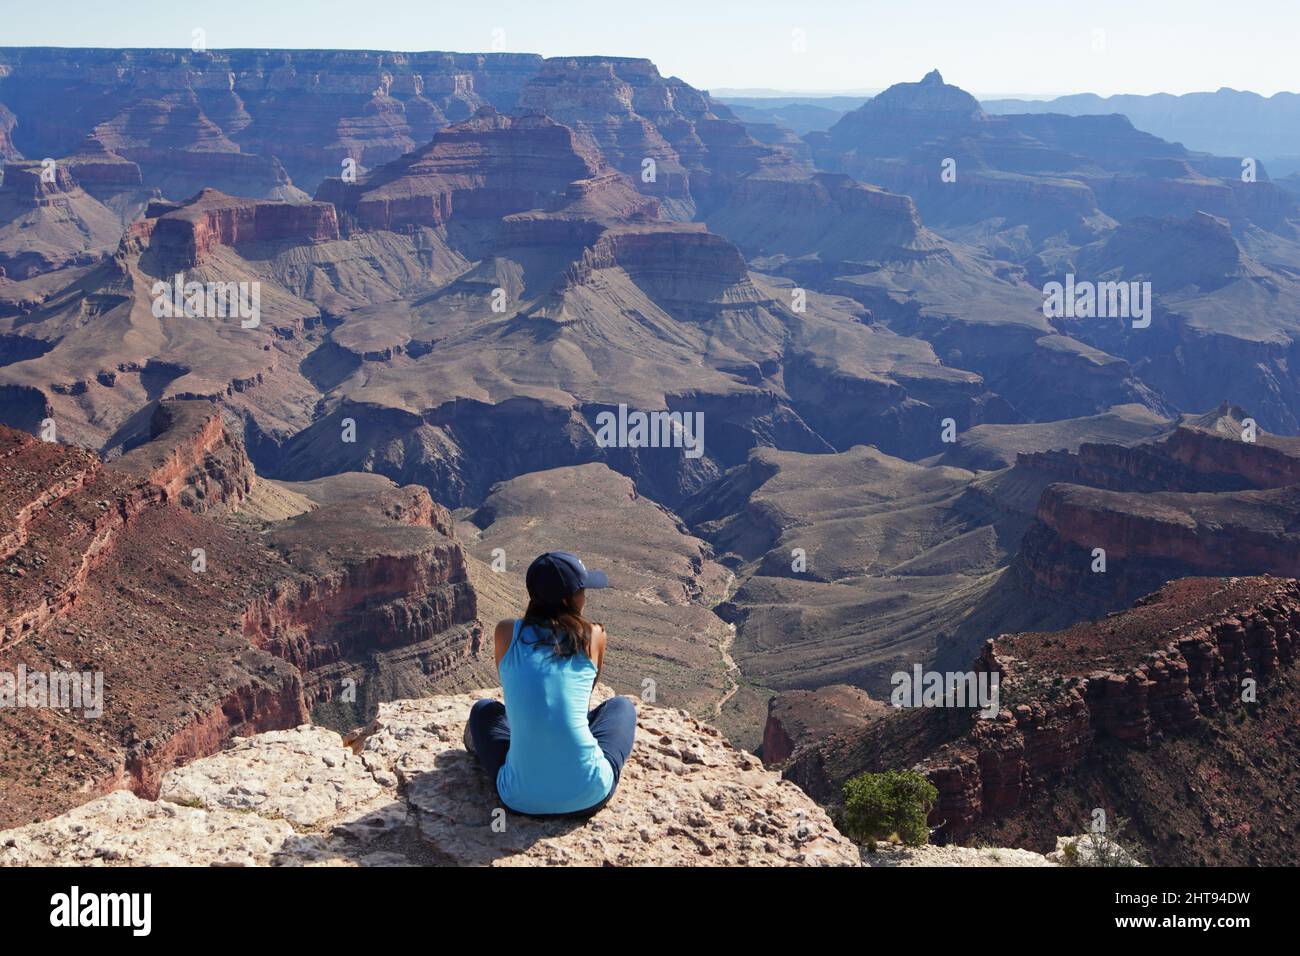 A girl sits cross-legged and looks at the view of cliffs, buttes, and rock layers, down in the depths of the Grand Canyon at Shoshone Point on the Sou Stock Photo